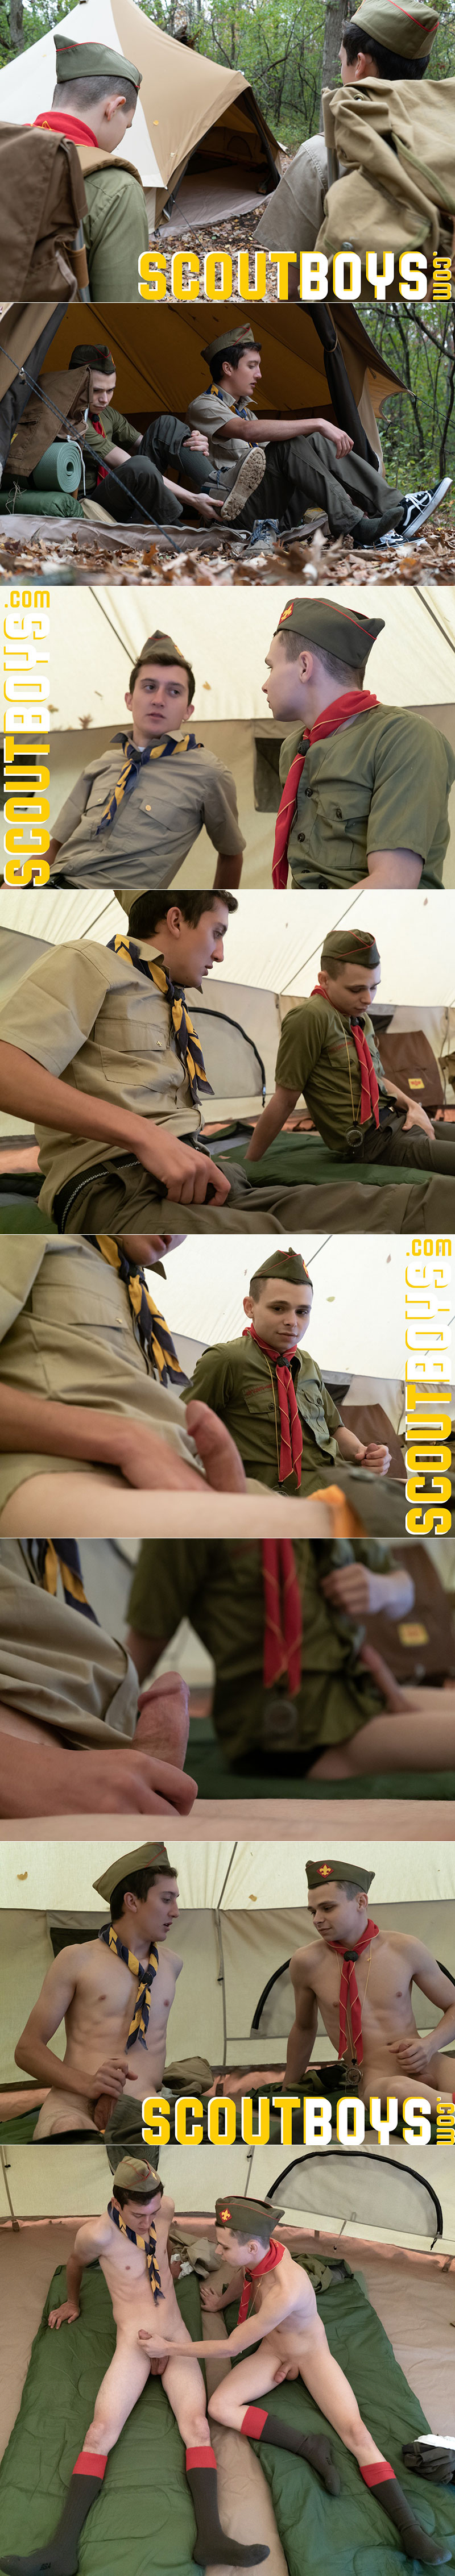 Scout Boys: Jack Andram fucks Austin Young while Killian Knox 'supervises' in "Boys at Camp"